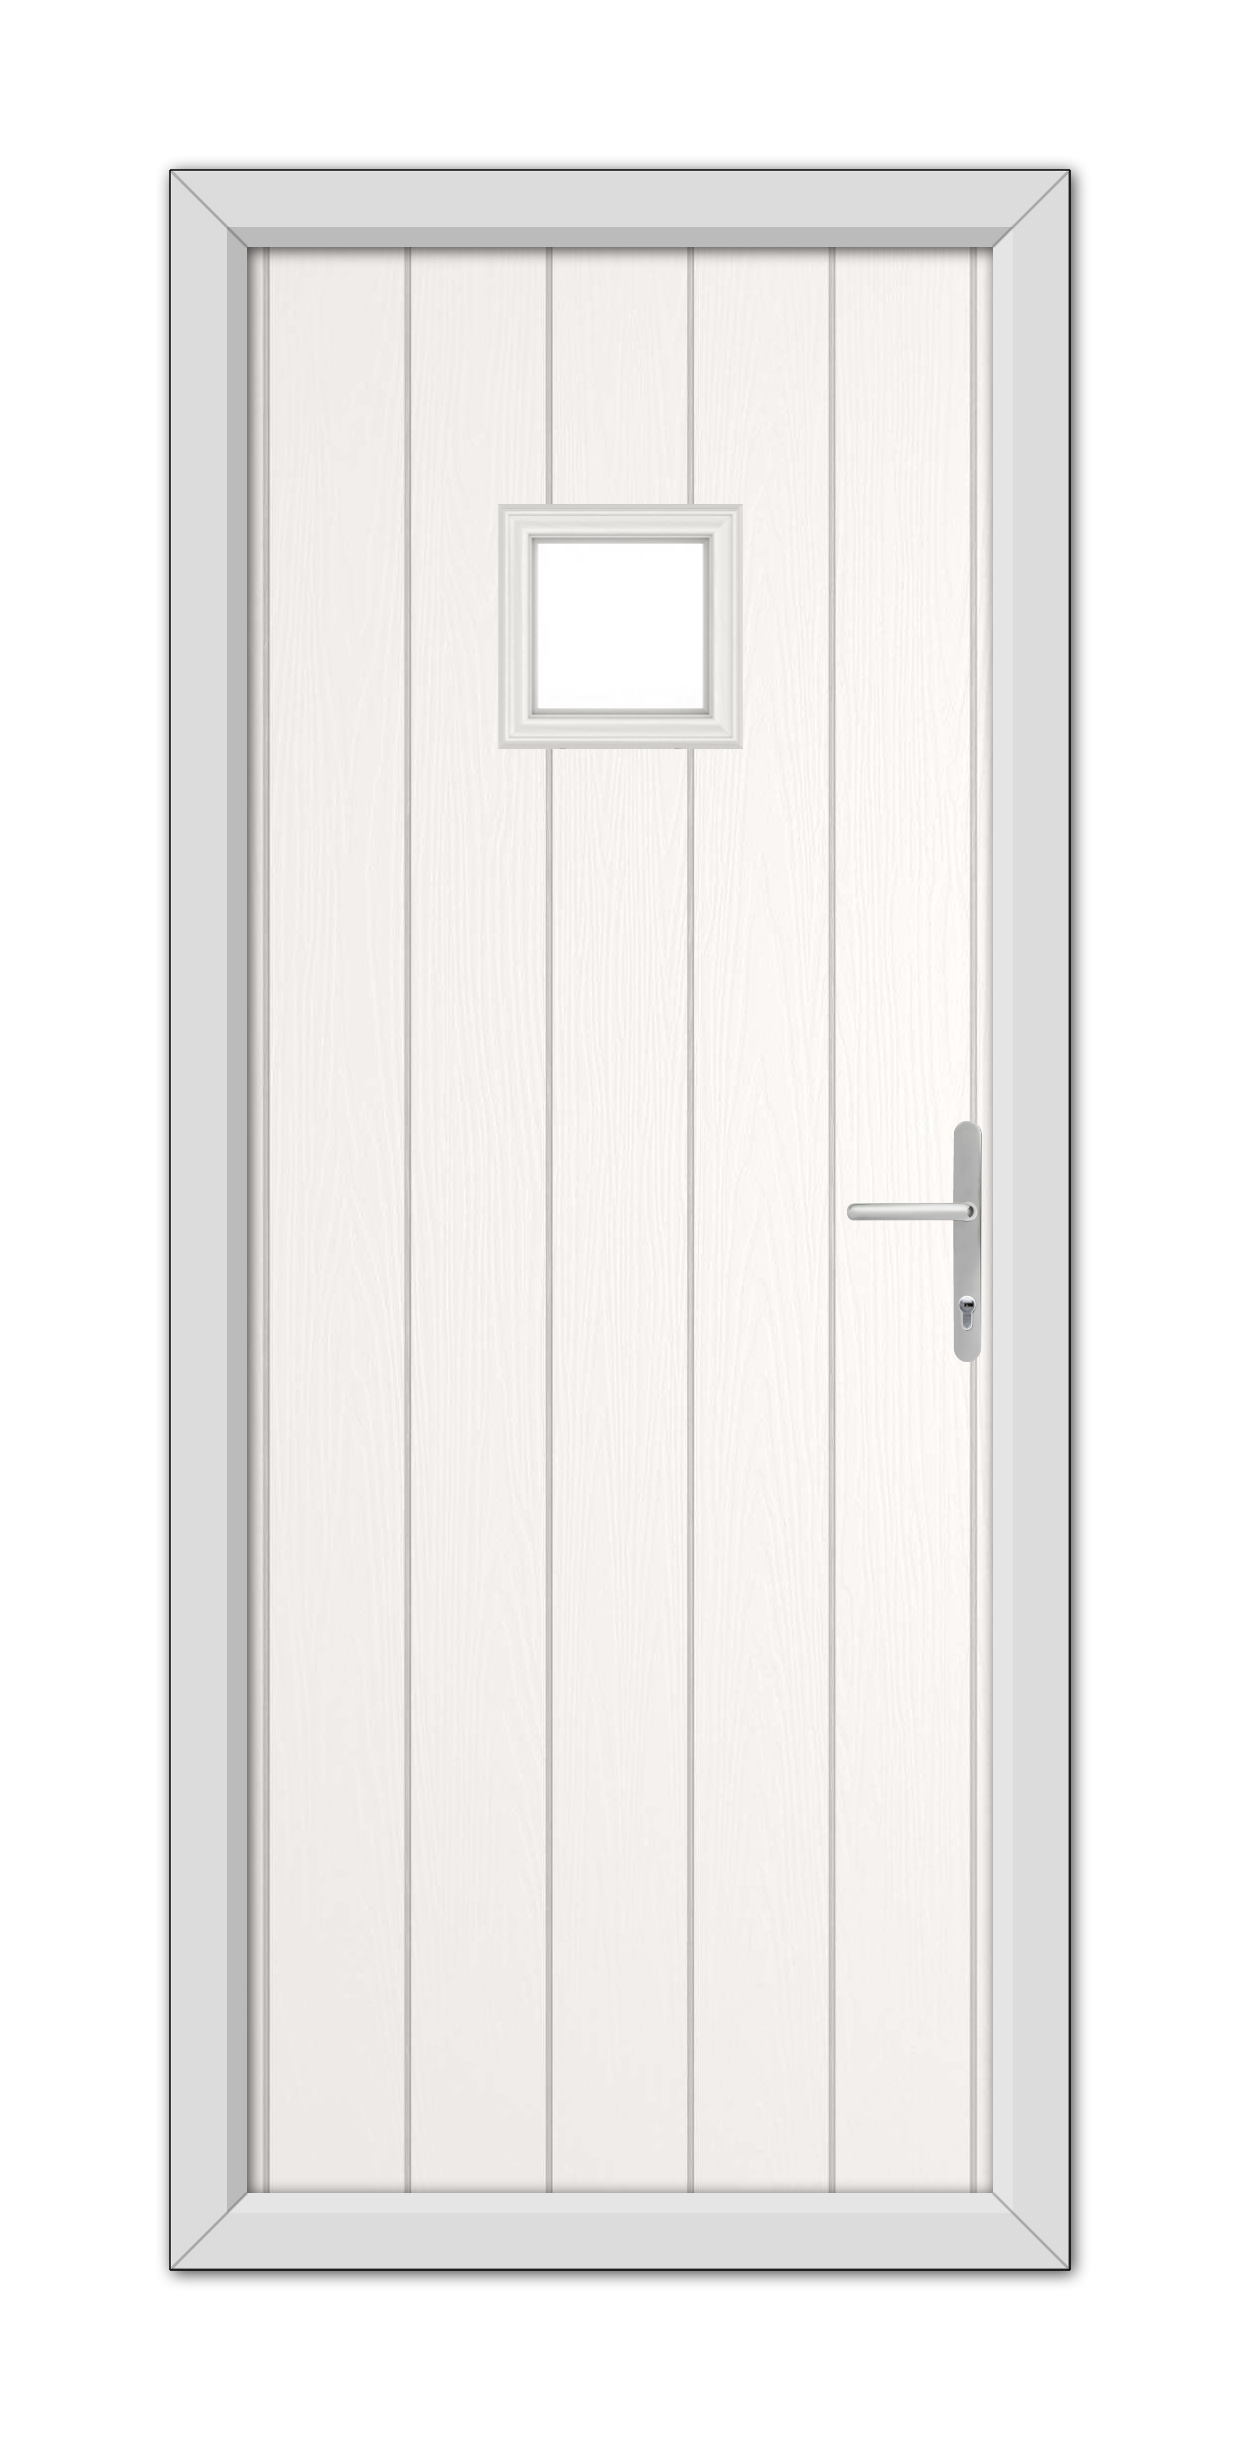 A modern White Brampton Composite Door 48mm Timber Core, featuring a rectangular frosted glass window and a sleek metallic handle, closed within a simple frame.